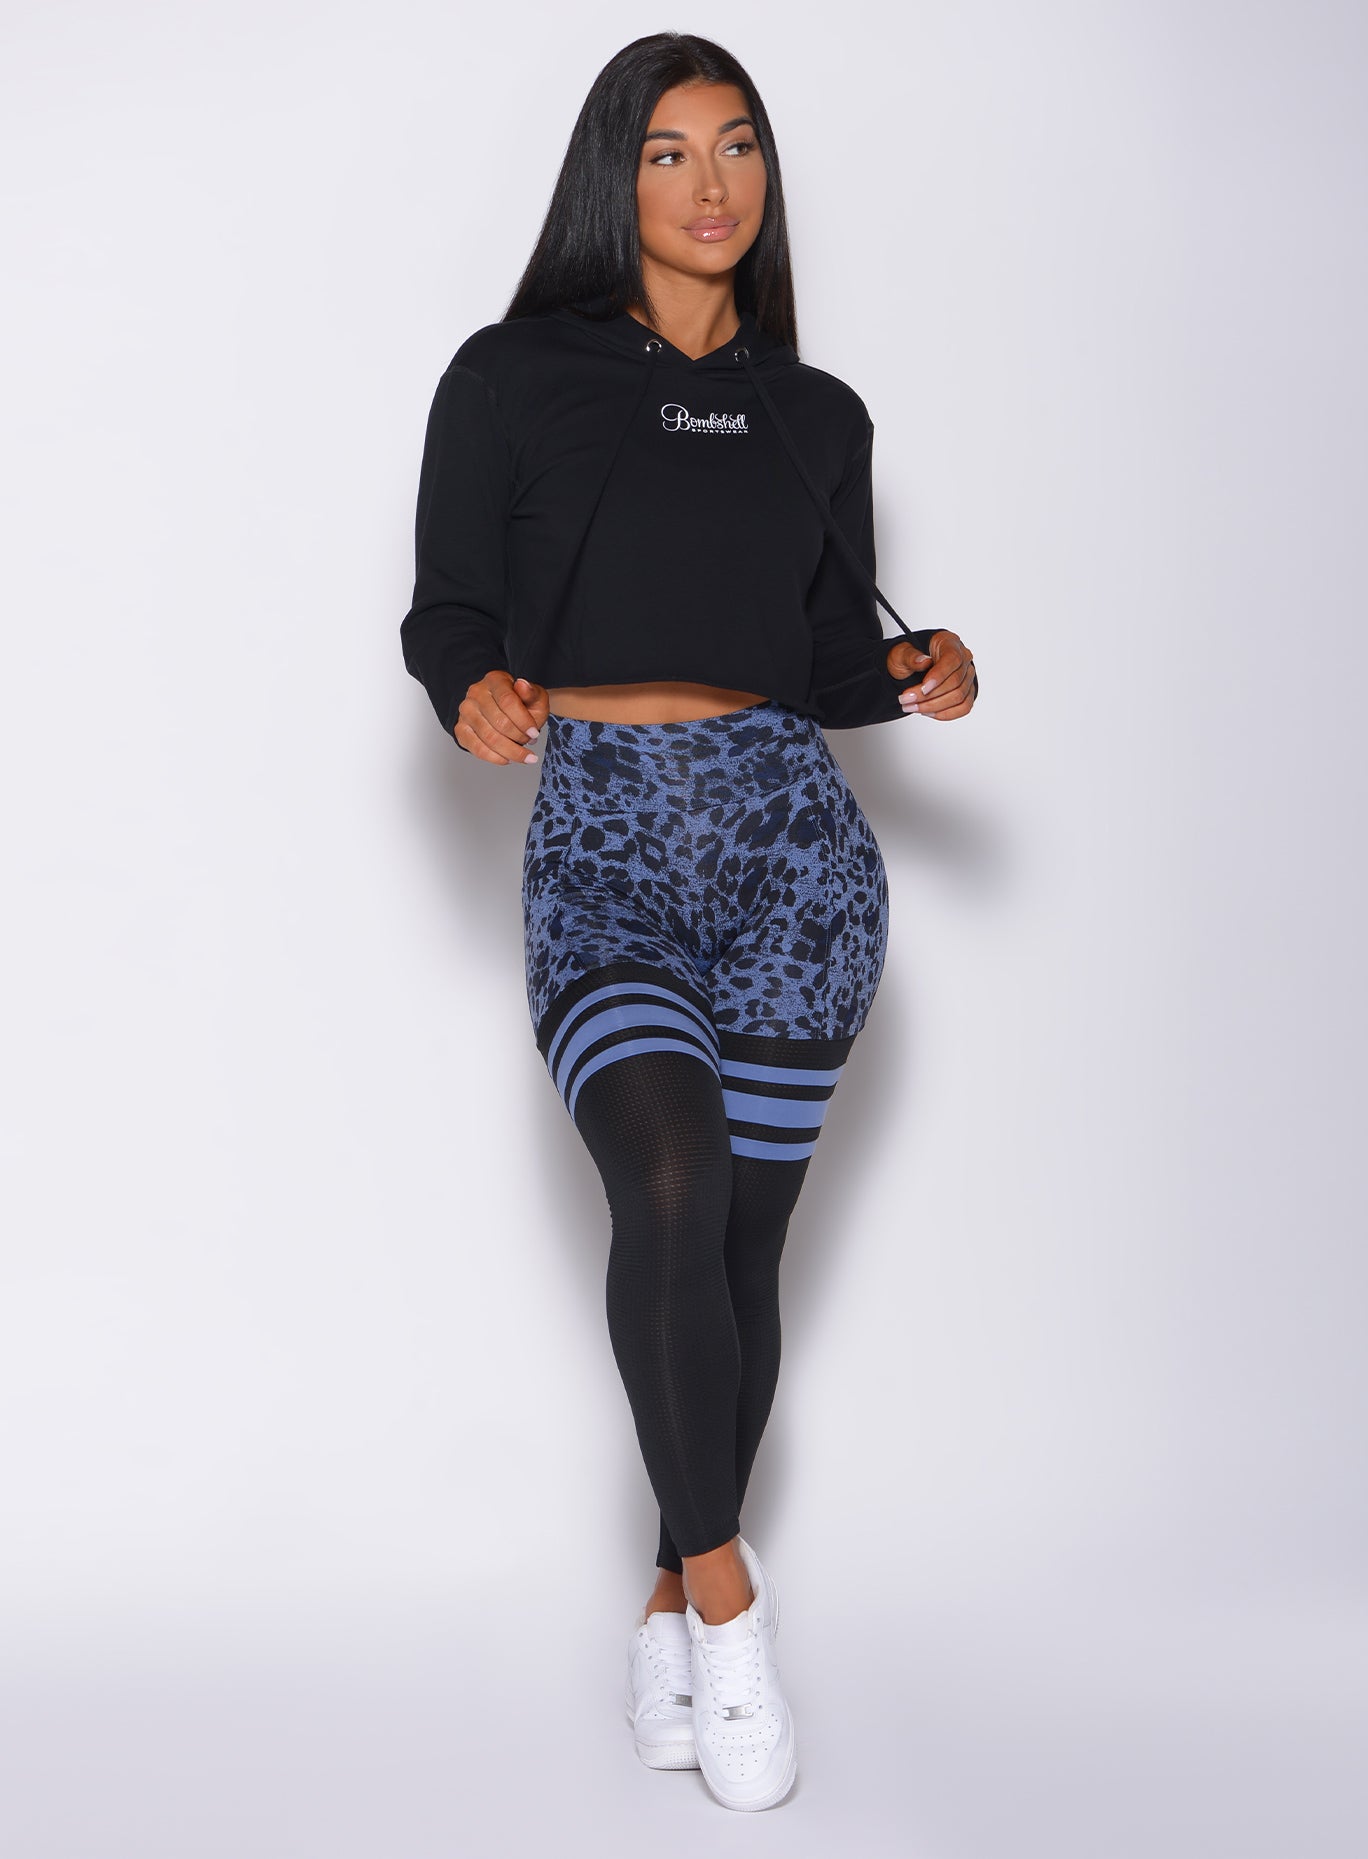 Front  profile view of a model in our black bombshell hoodie and a cheetah print leggings